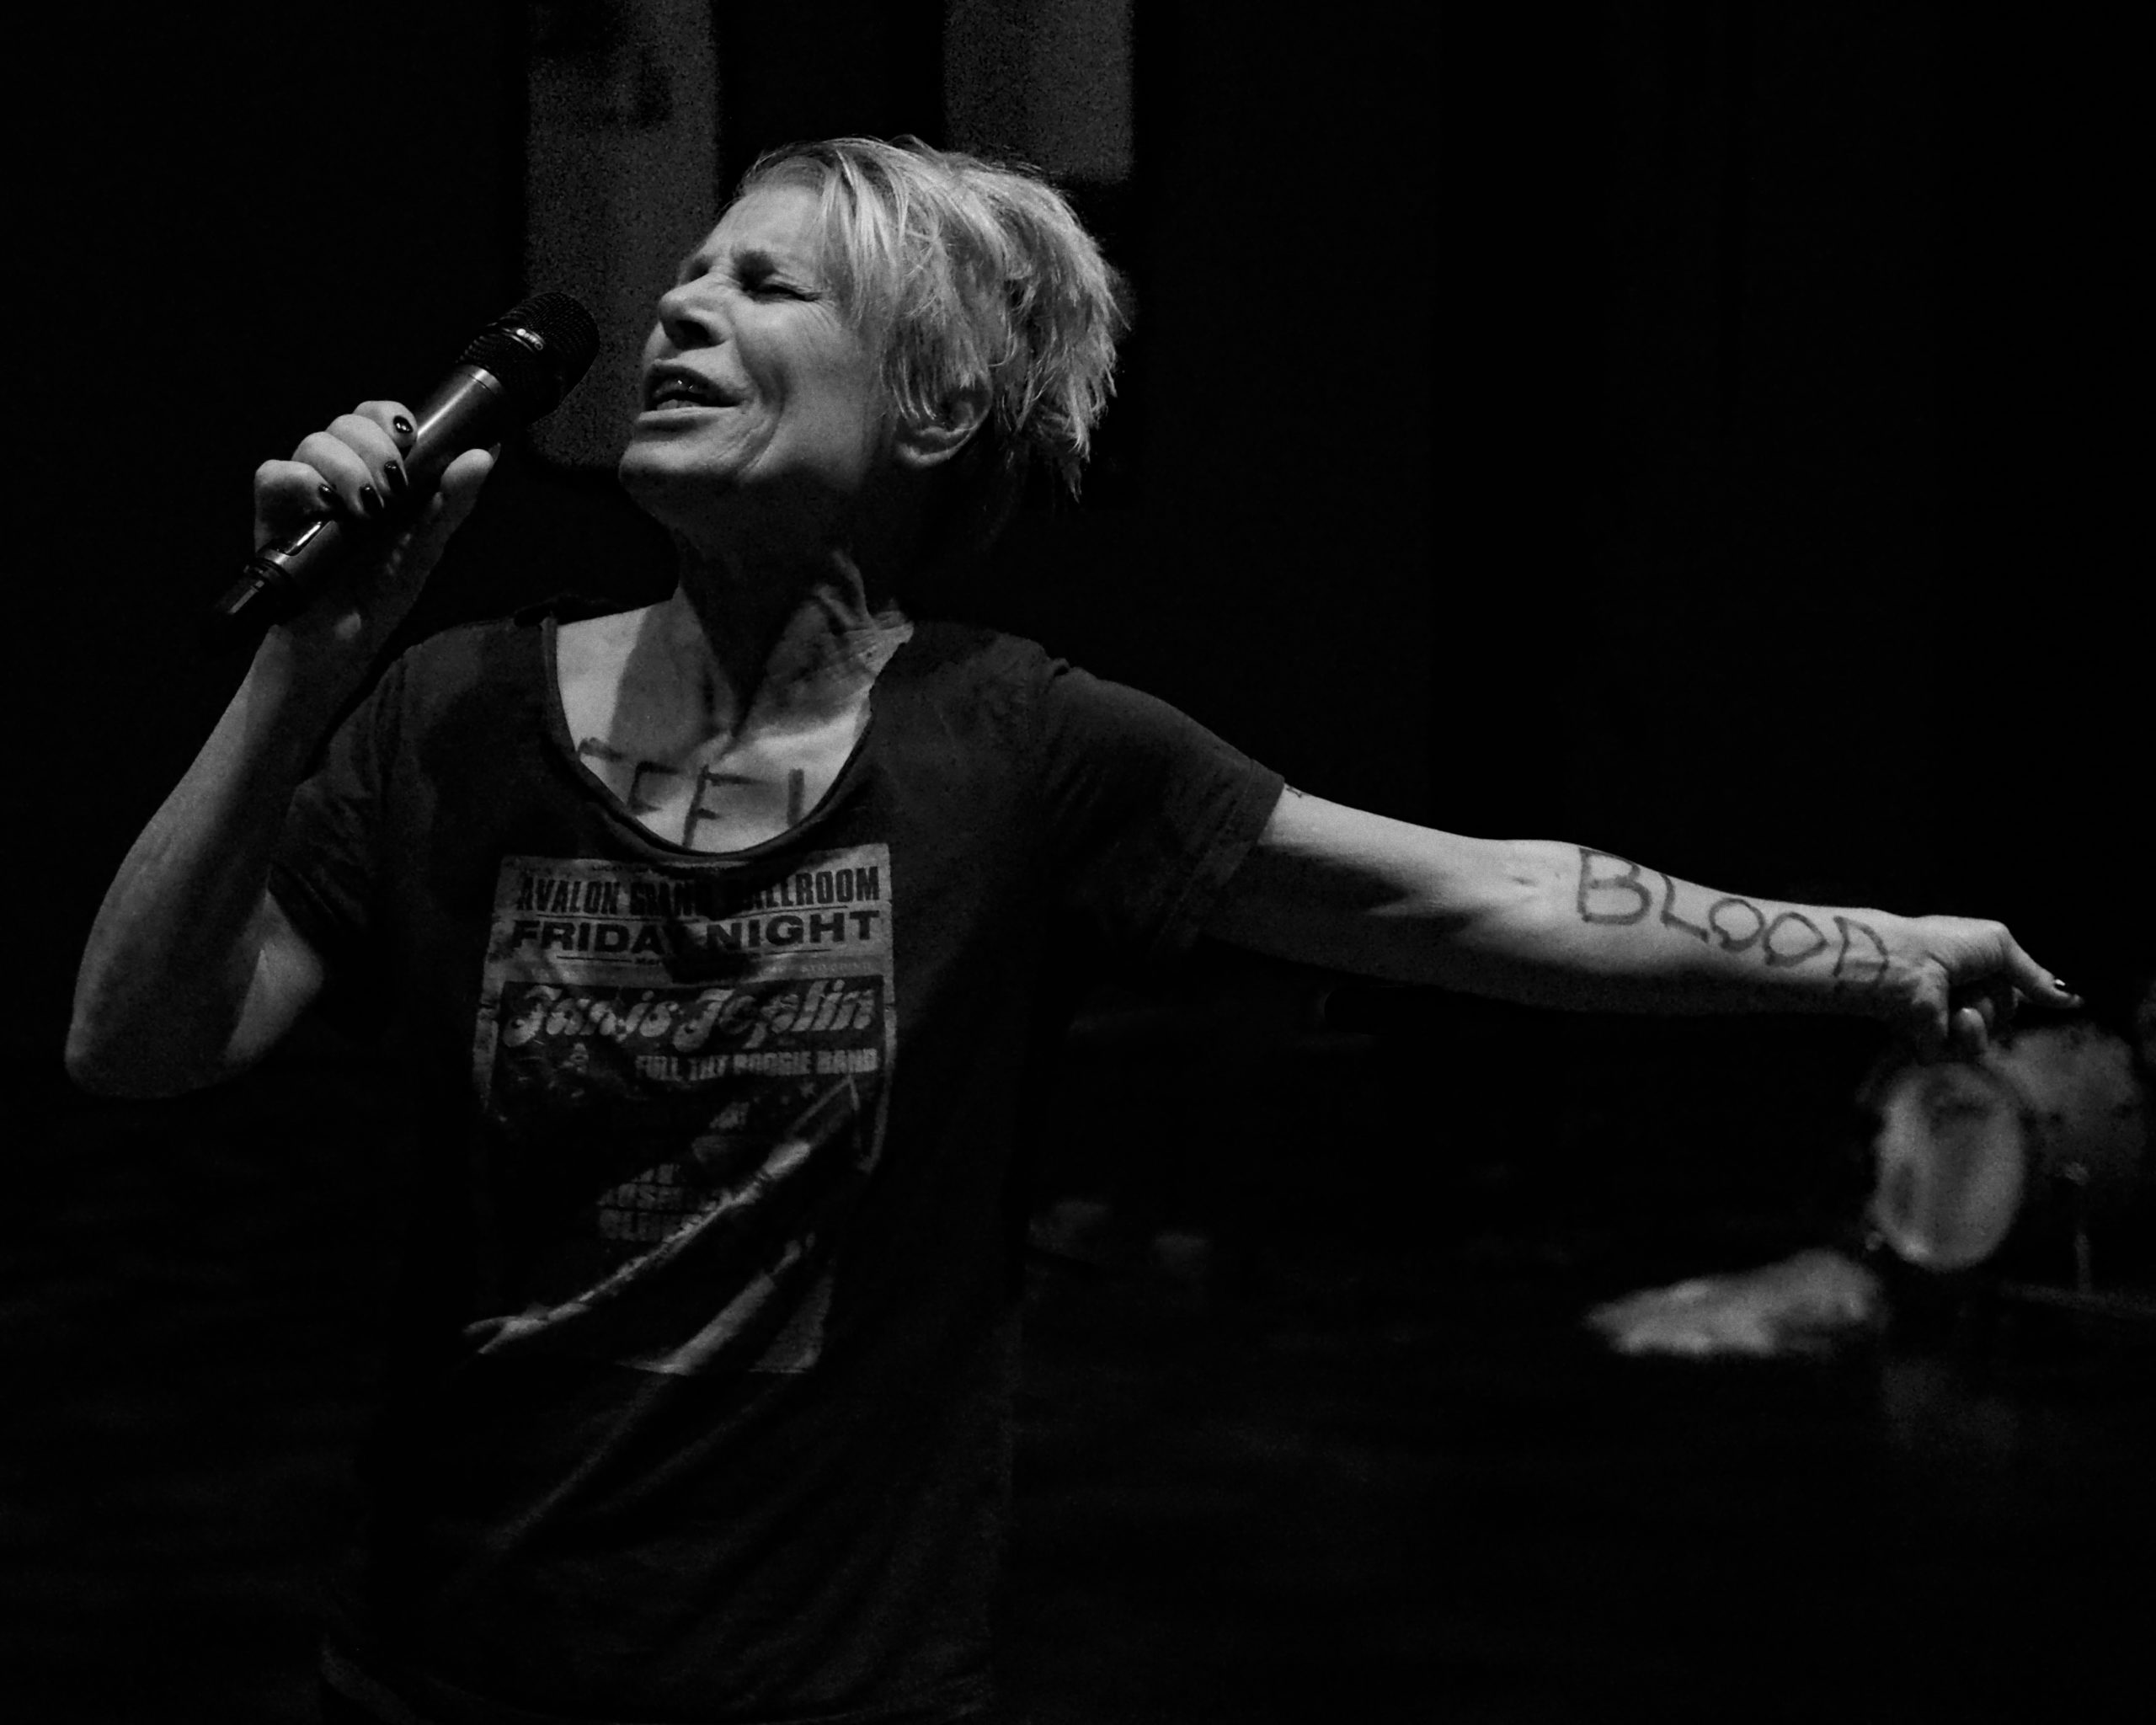 Katie Duck seen on stage with a microphone and the word "BLOOD" written on her forearm.